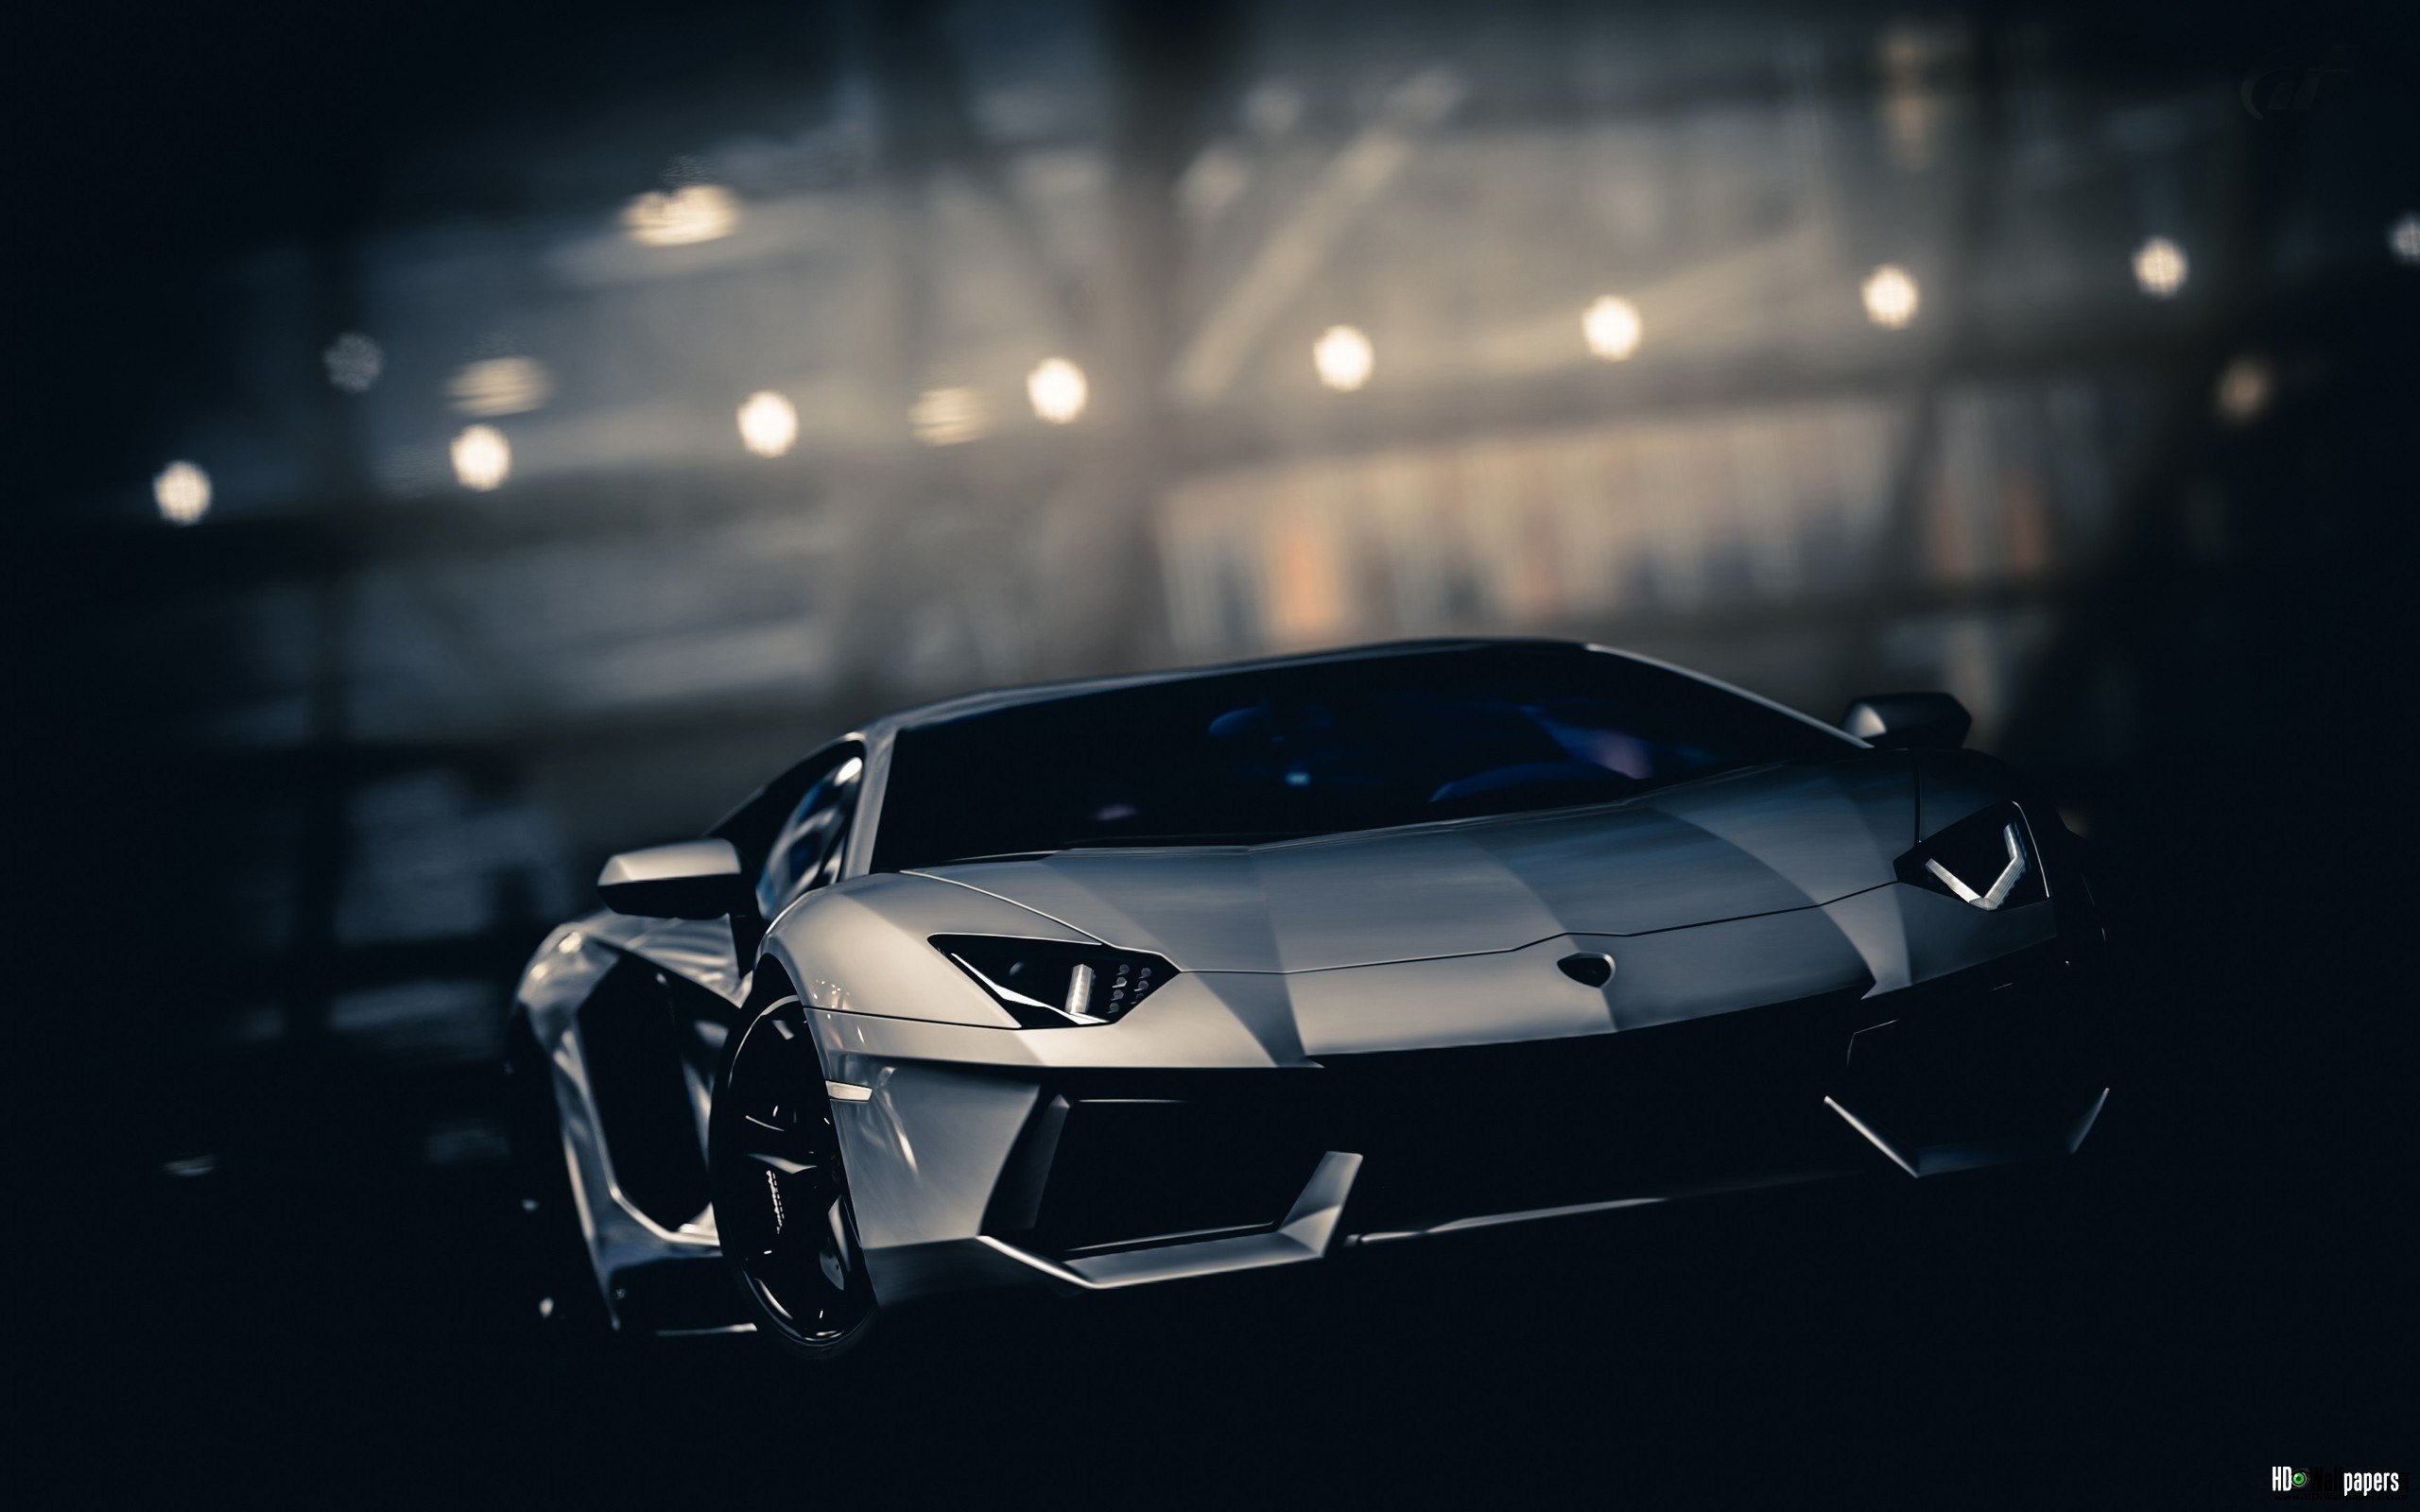  Cars Wallpapers HD Free Download for Desktop 01 HD Wallpapers